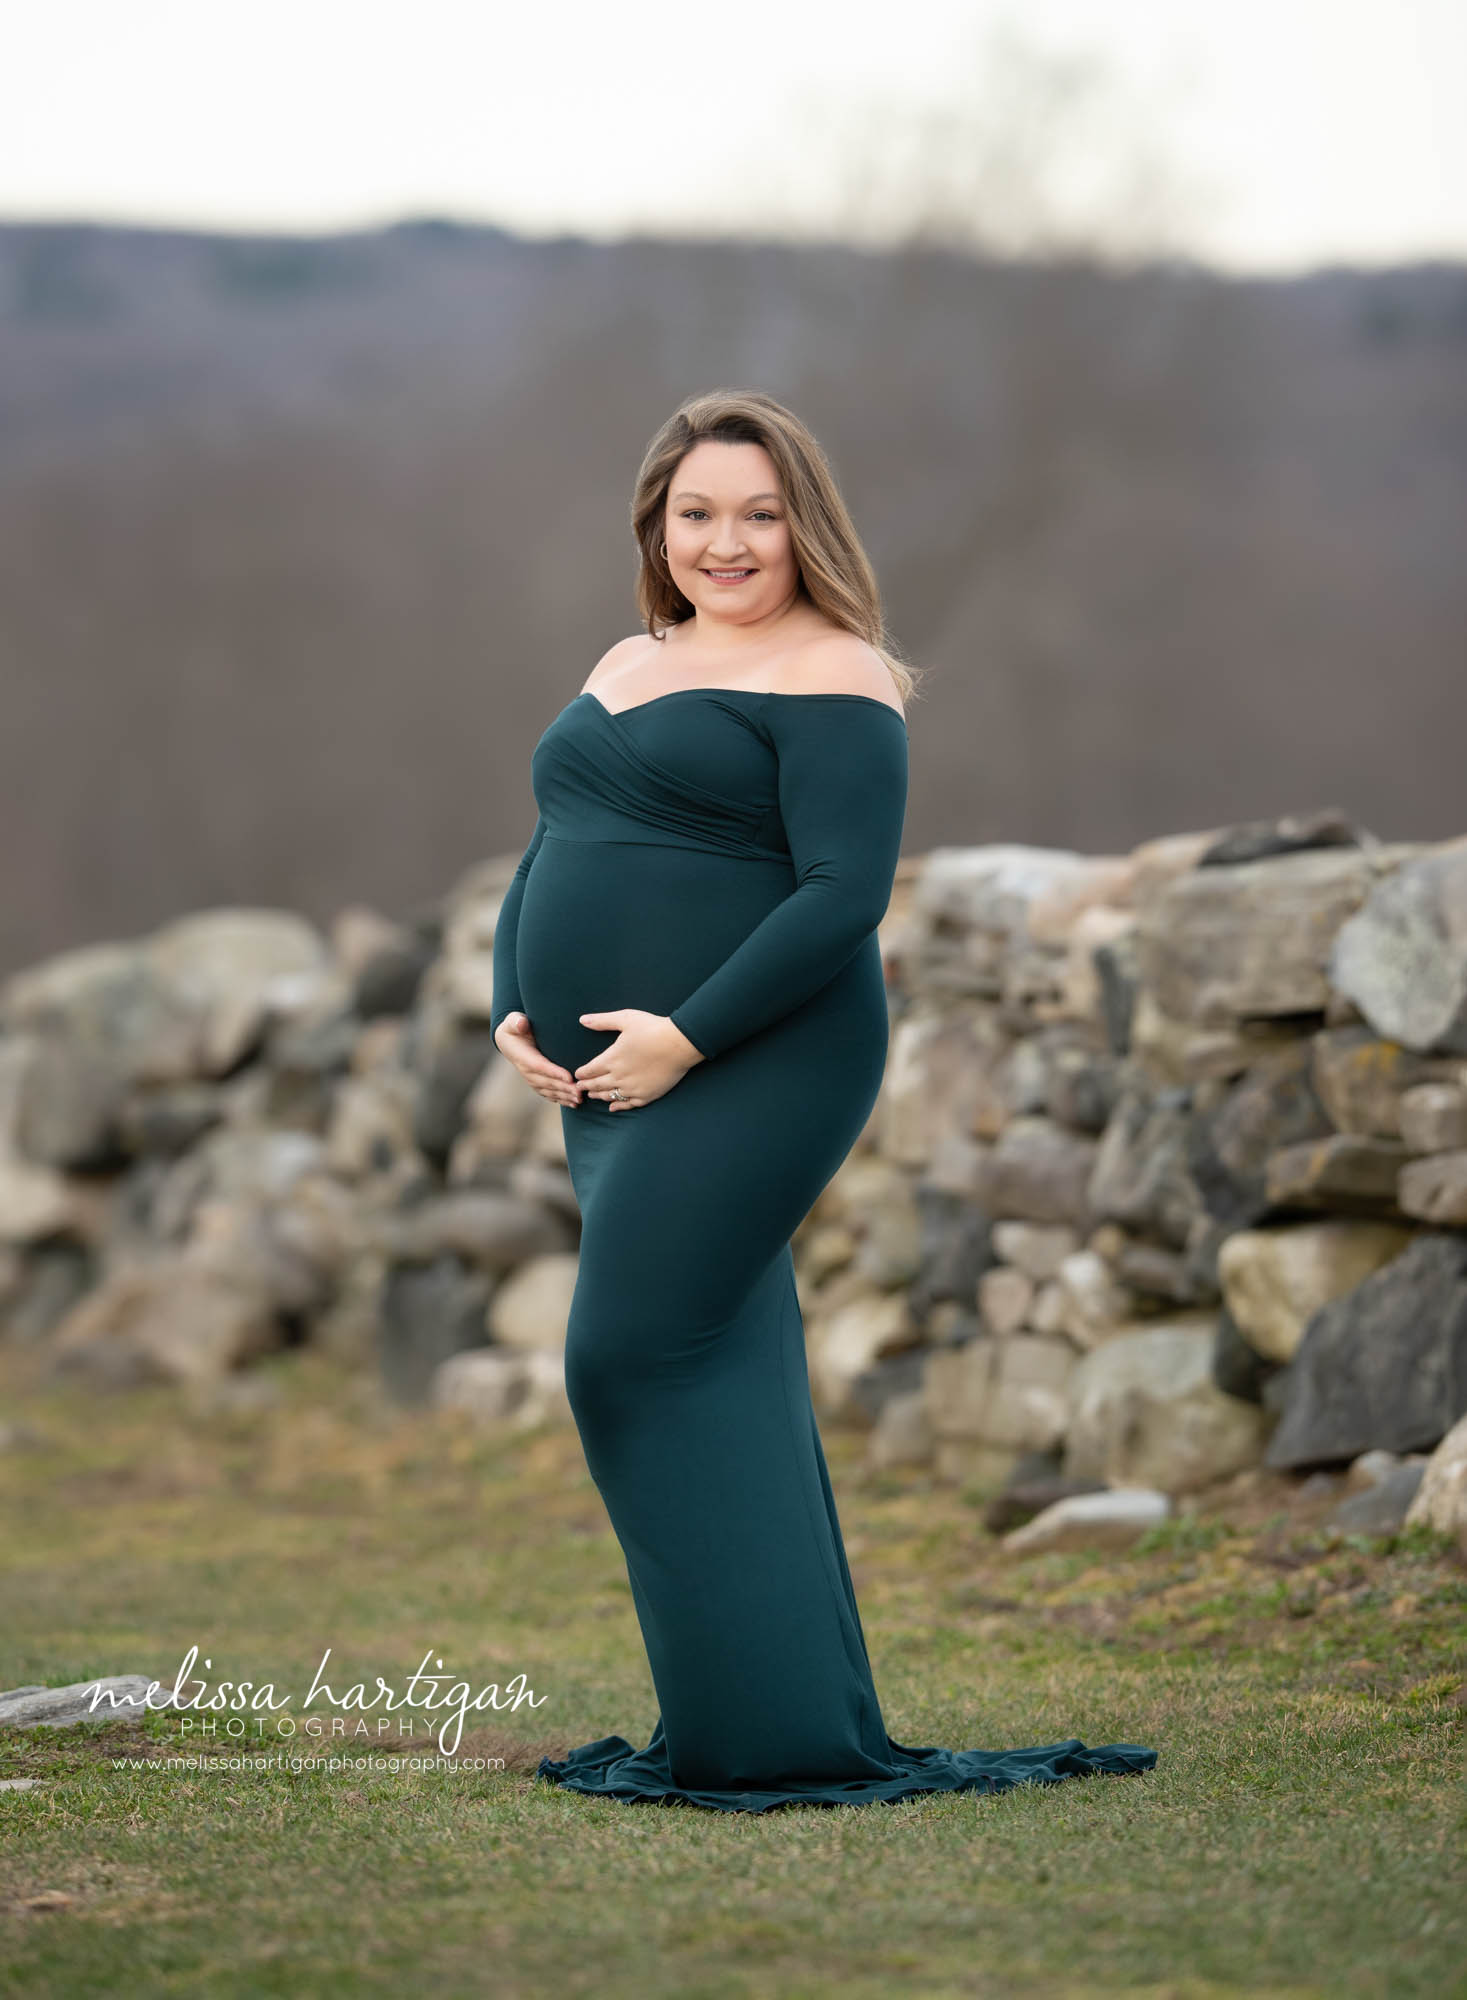 expectant mom standing holding baby belly smiling happy wearing green form fitted maternity gown